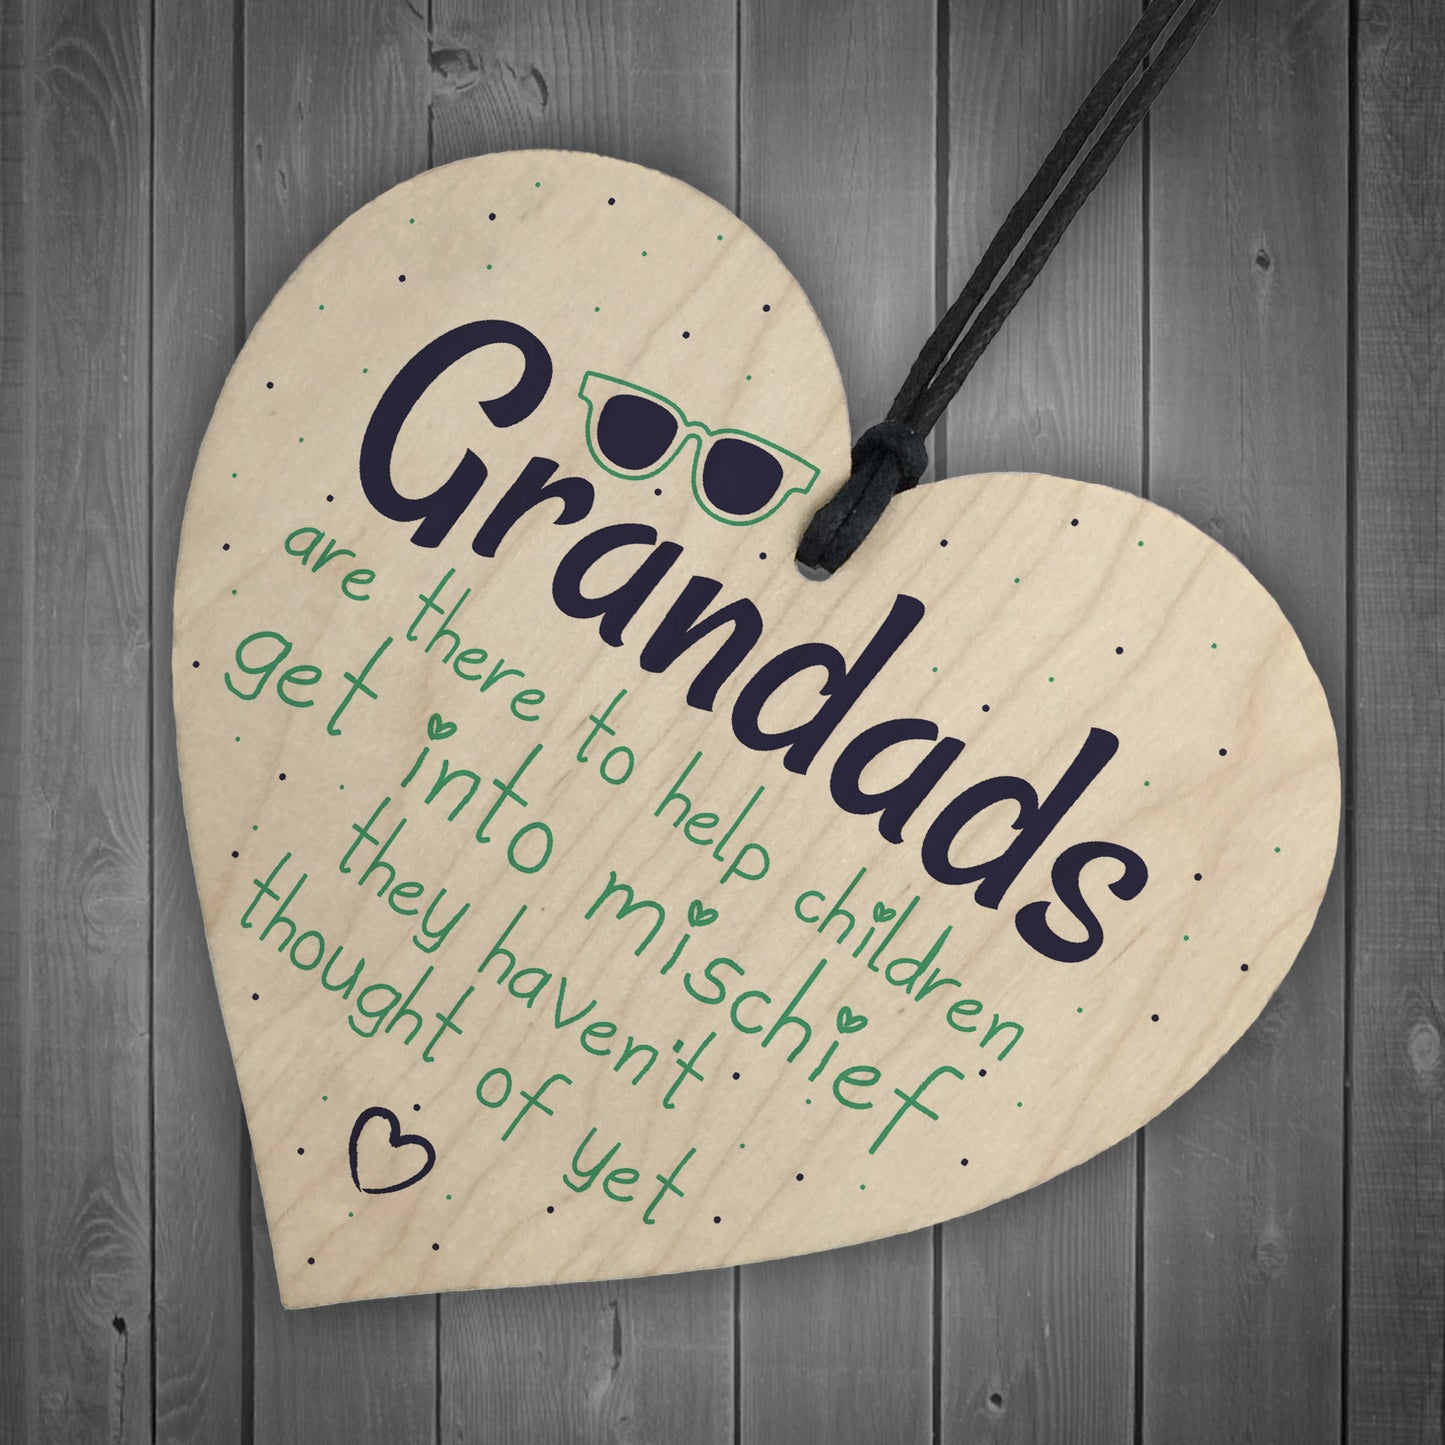 Funny Sign Grandad Birthday Gift Heart Wall Plaque Fathers Day